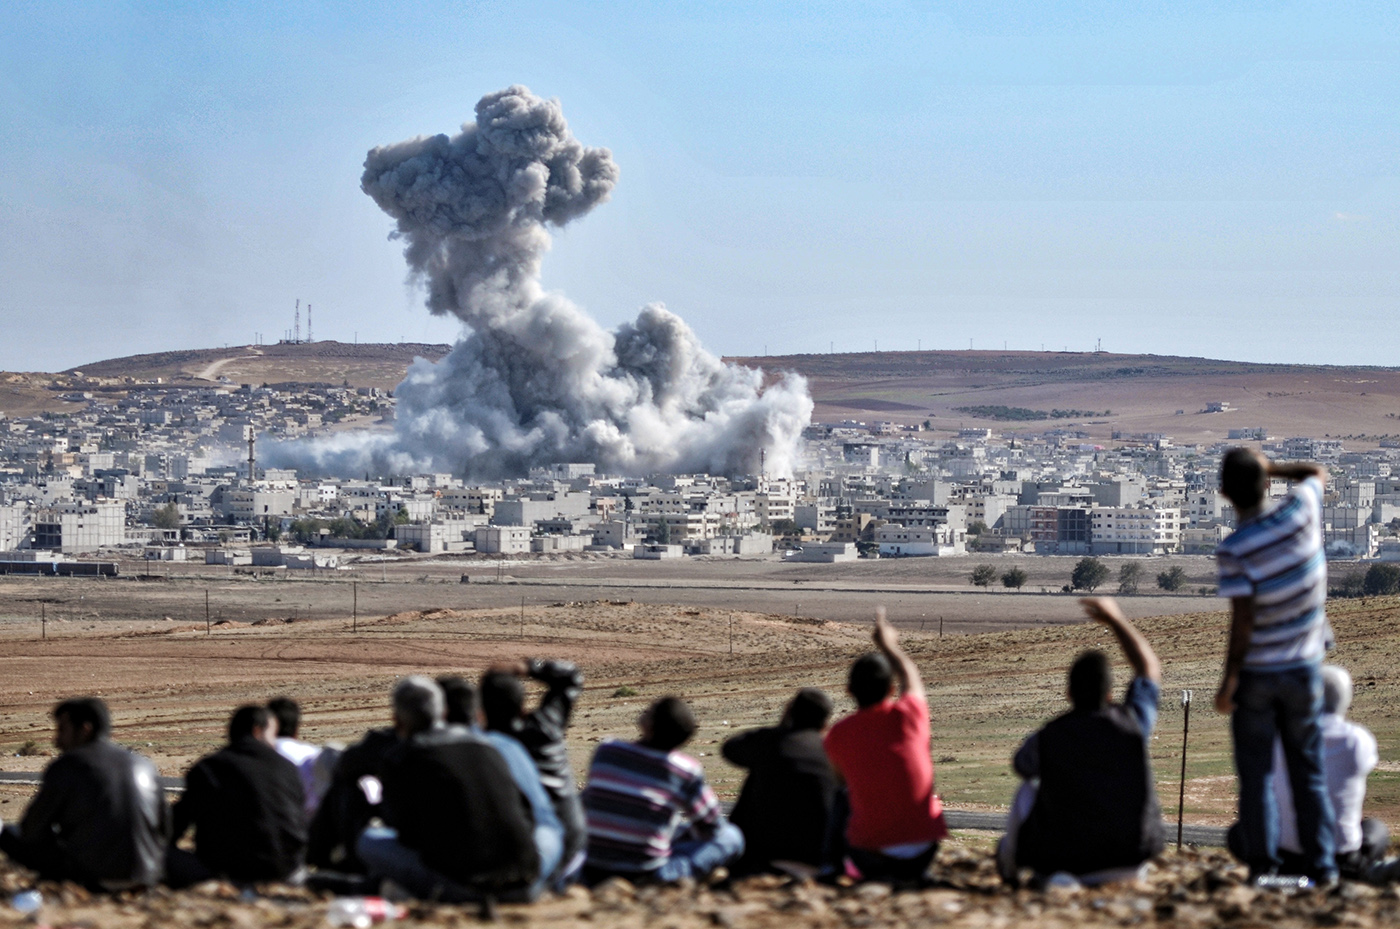 People watch an explosion after an apparent US-led coalition airstrike on Kobane, Syria, as seen from the Turkish side of the border, near Suruc district, Sanliurfa, Turkey, 22 October 2014.